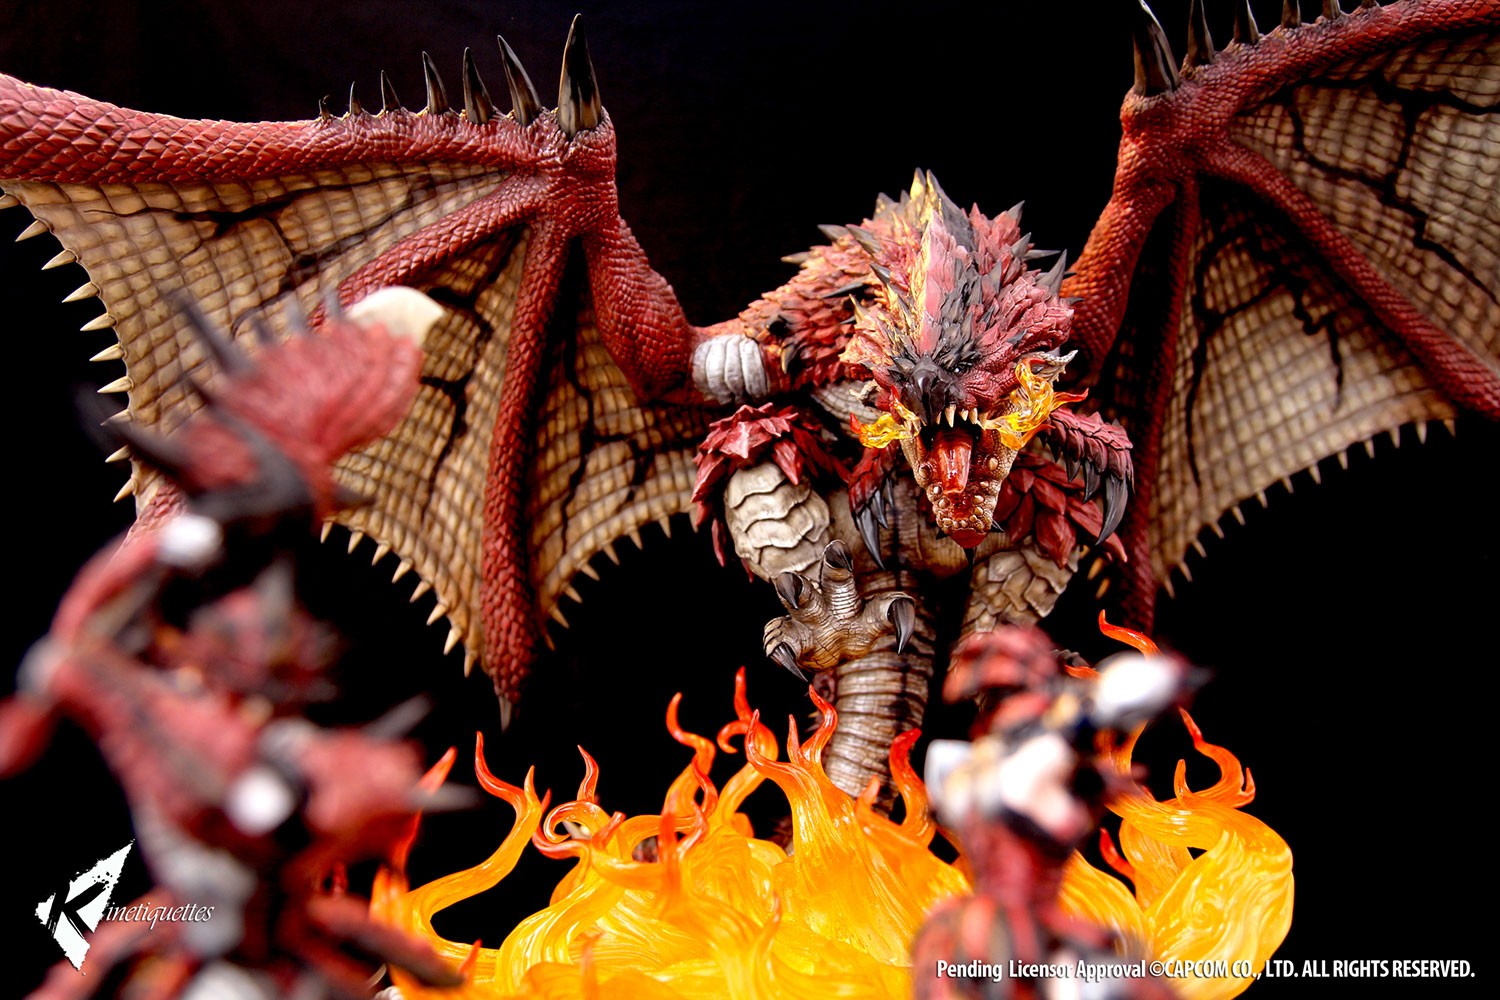 Rathalos: The Fiery Bundle (Prototype Shown) View 8